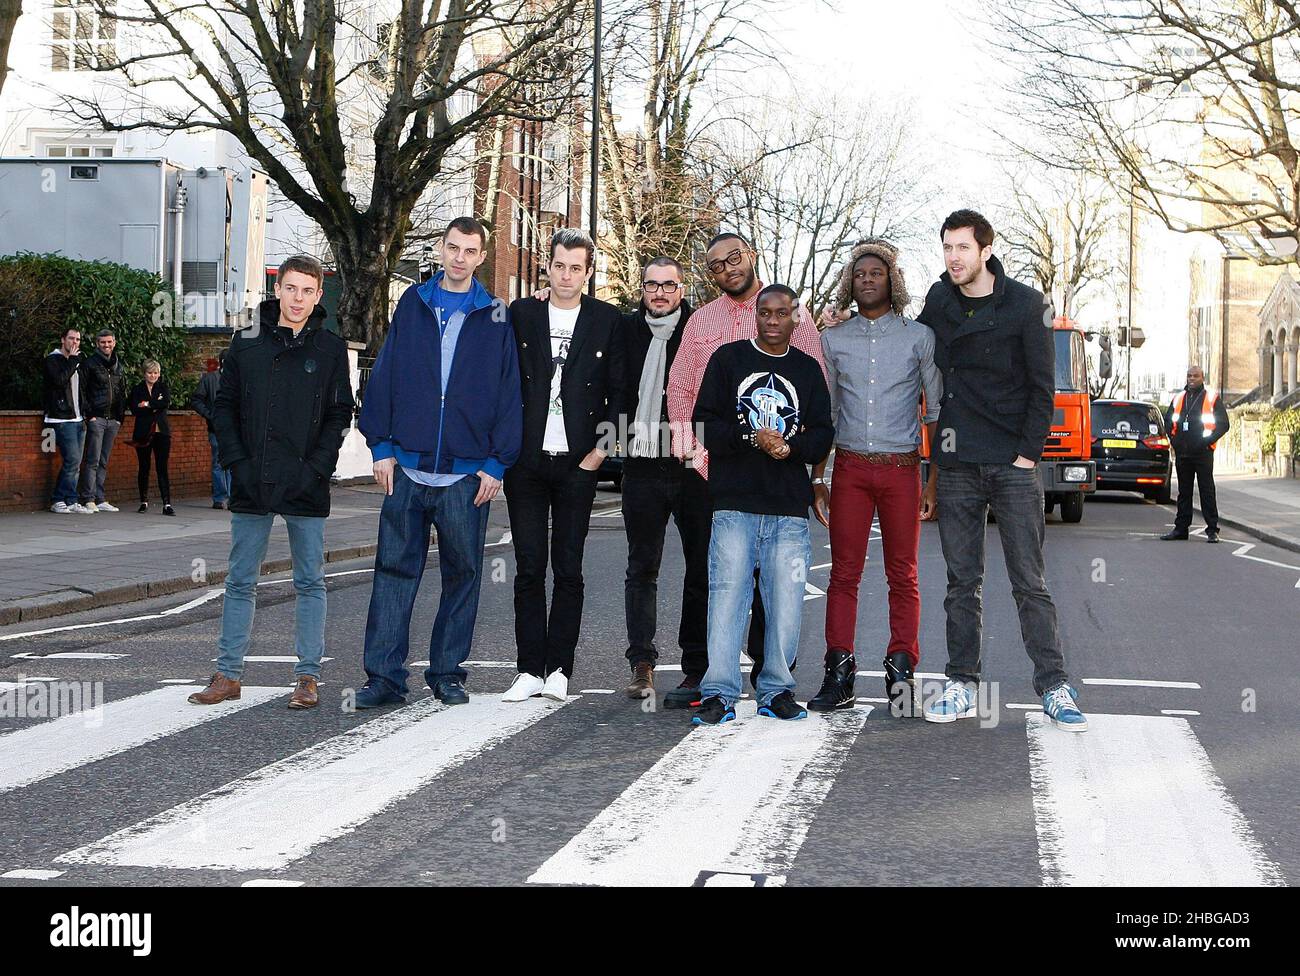 L-R) Jamie T, Tim Westwood, Mark Ronson, Zane Lowe, Mr Jam, Tinchy Stryder,  Labrinth and Calvin Harris pose on the Abbey Road zebra crossing as part of  the Developing Musicians Music Industry